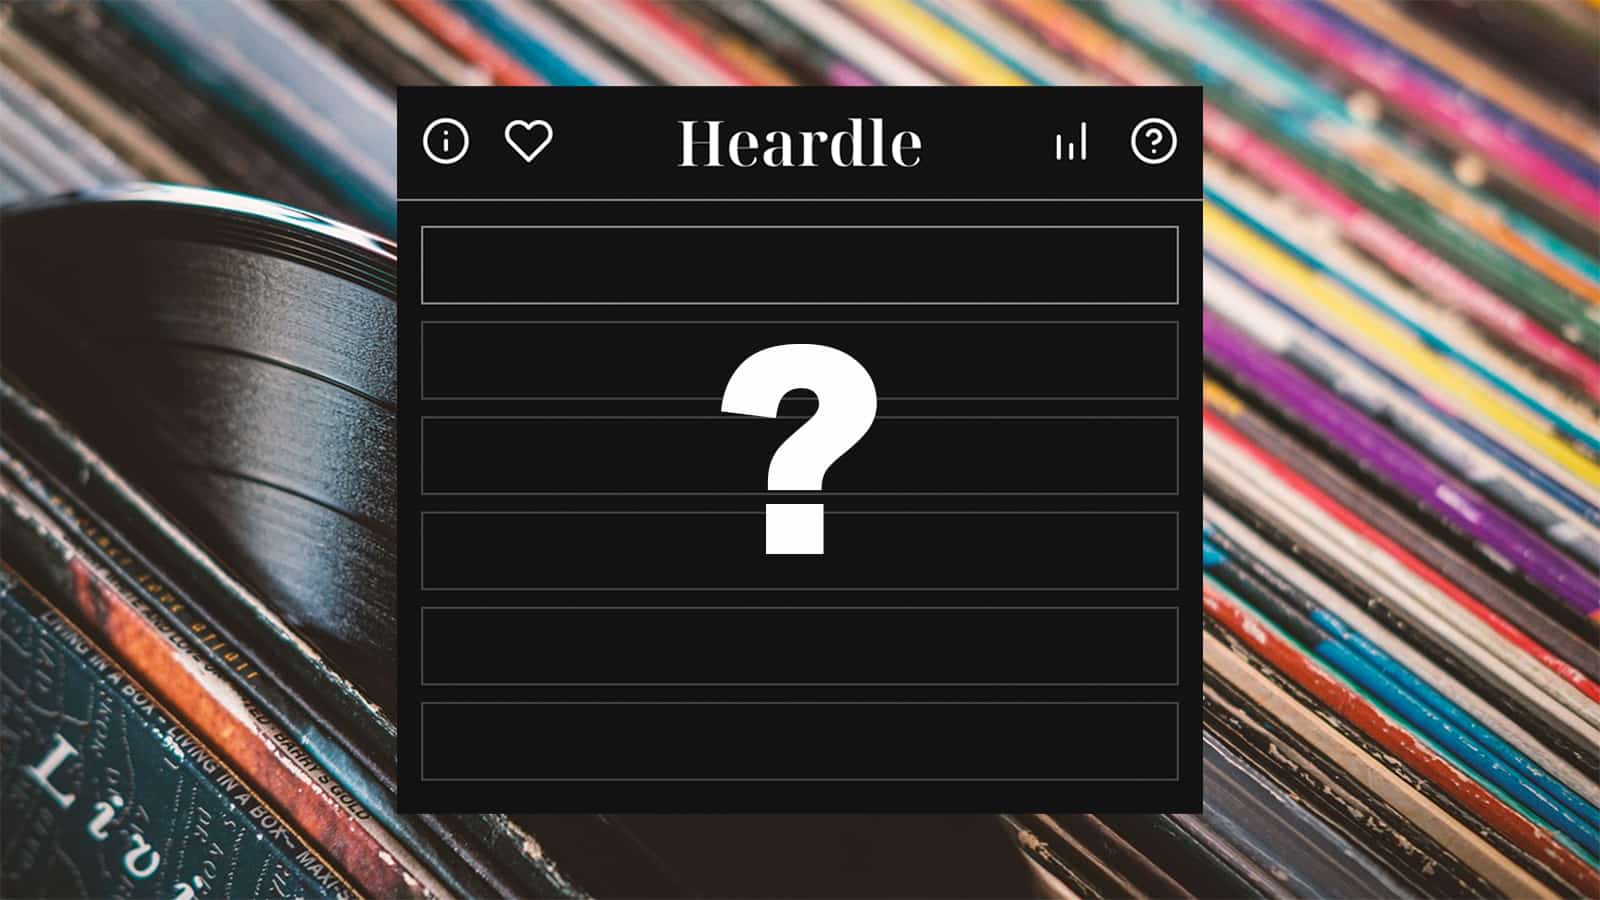 The Heardle screen with a question mark on it